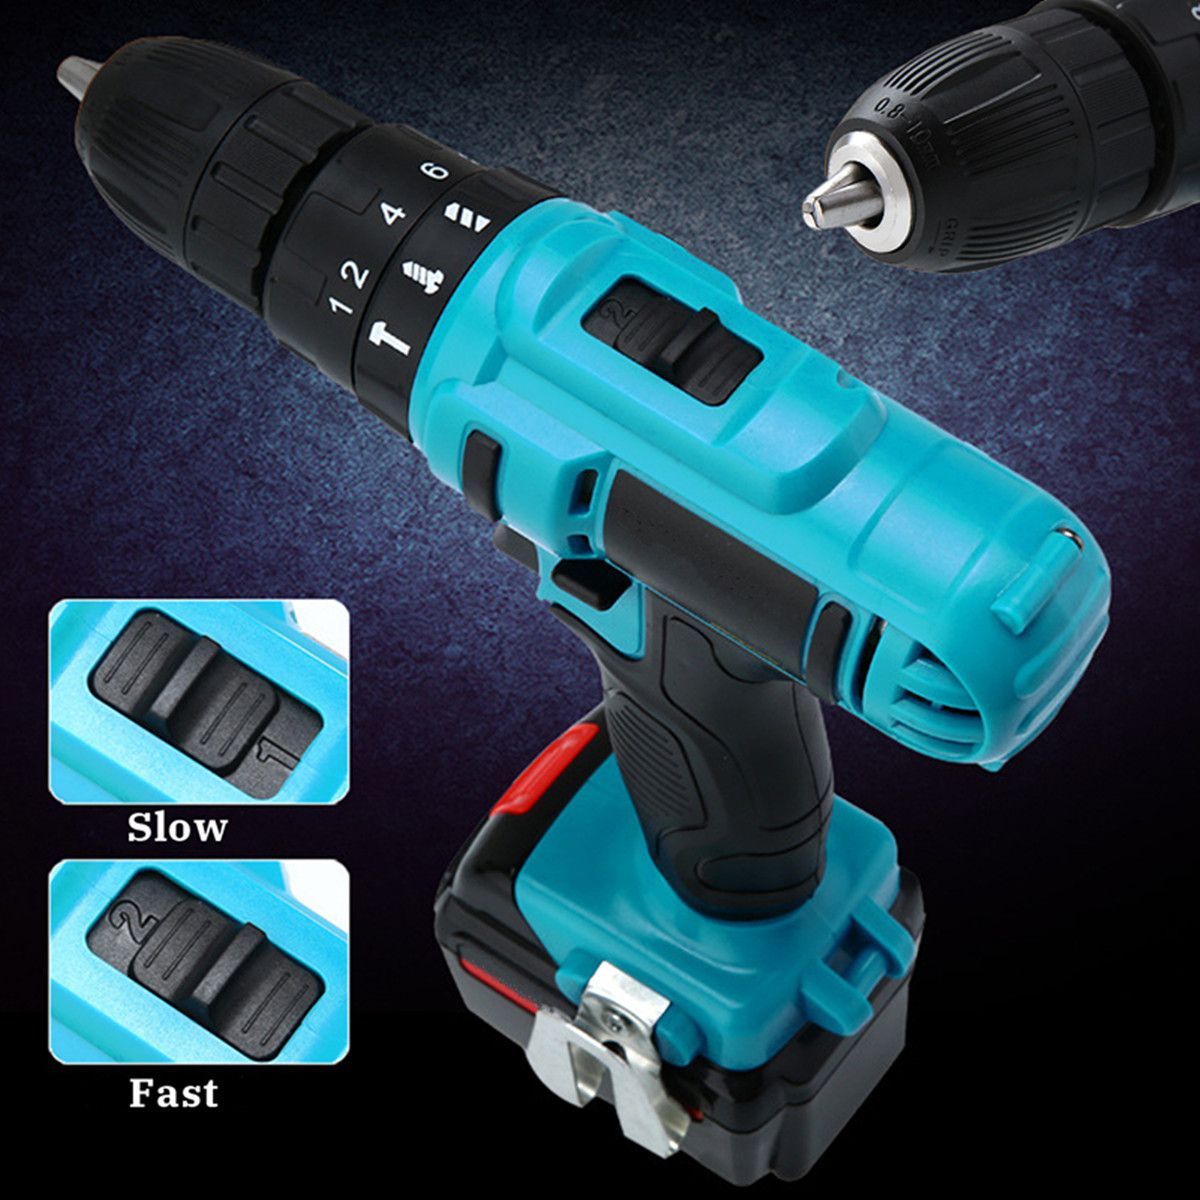 21V-Cordless-Impact-Power-Drill-Electric-Screwdriver-Set-with-2-Li-ion-Batteries-1372018